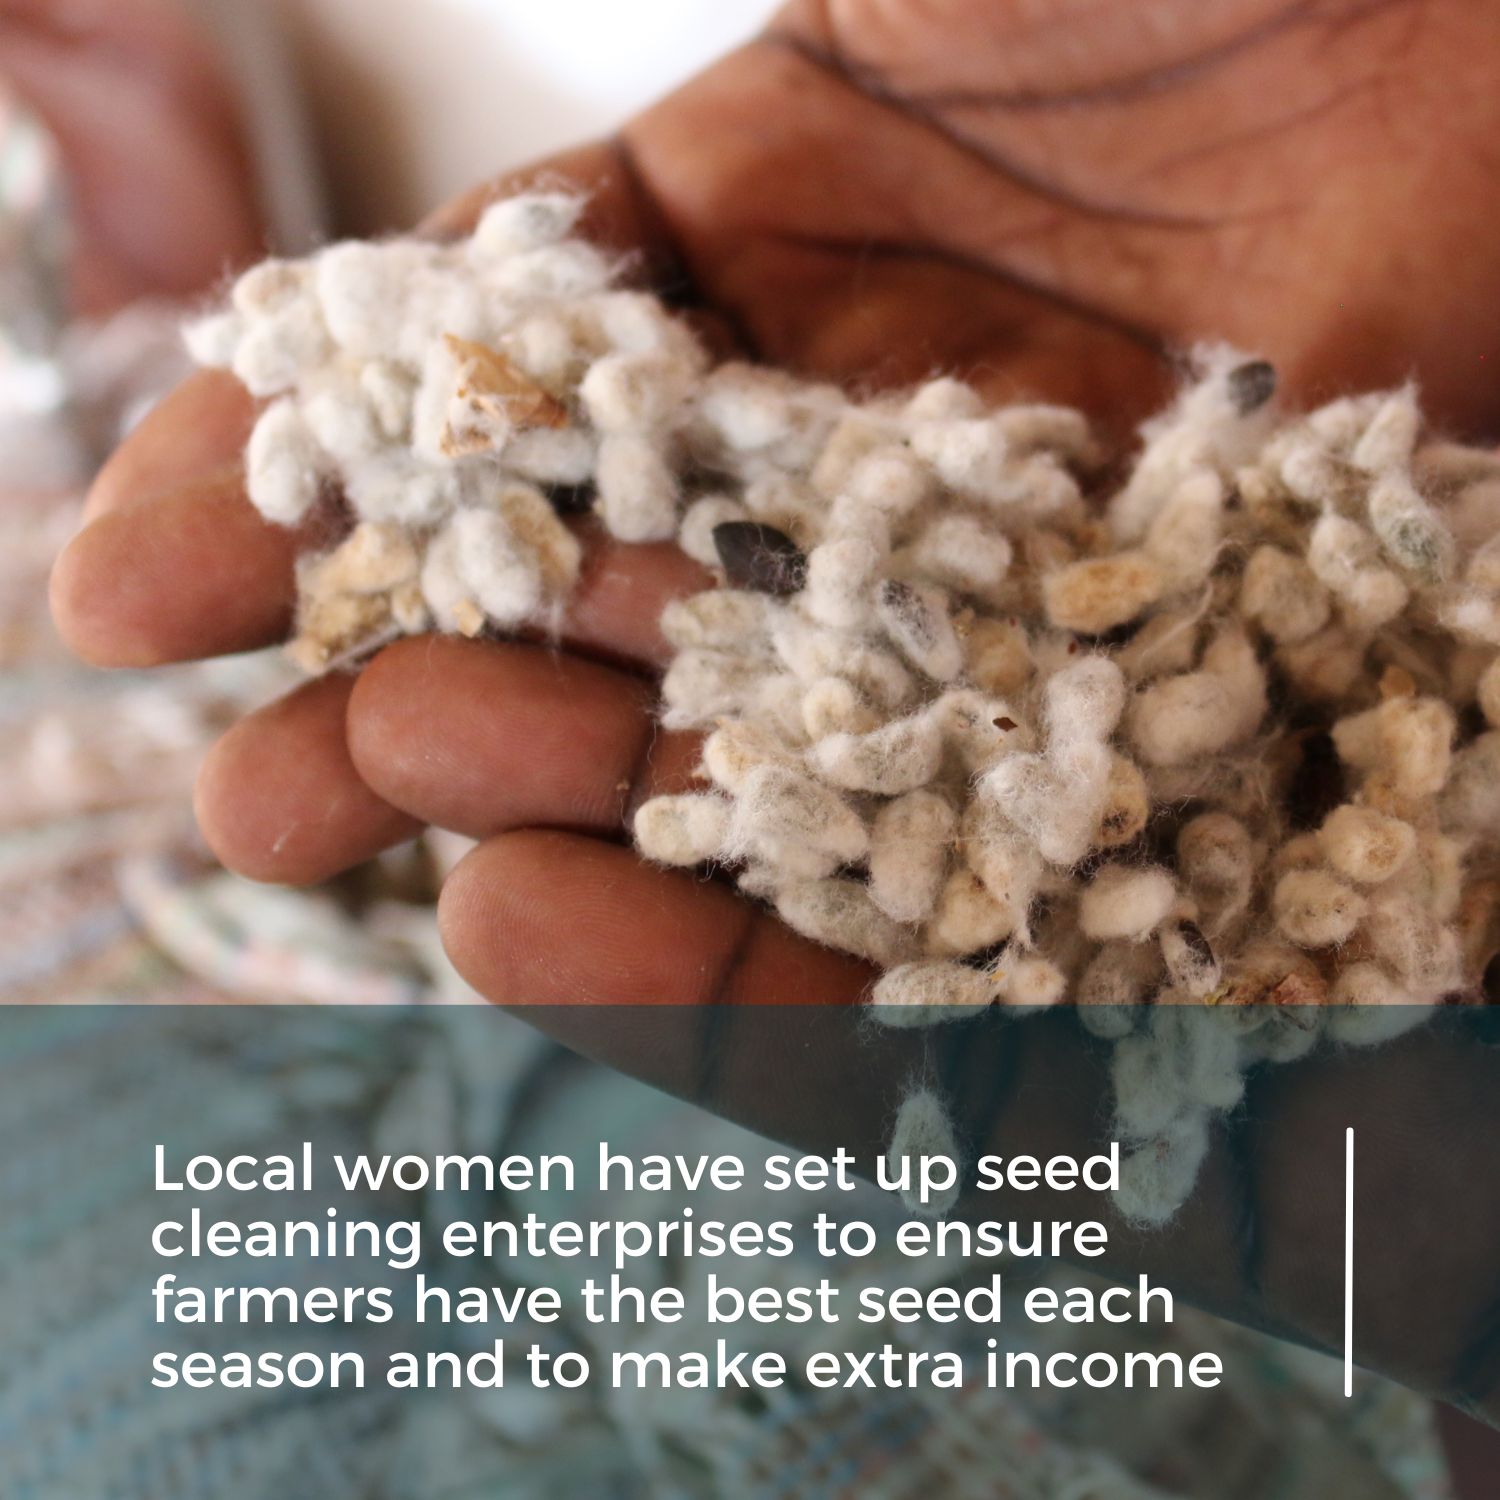 Women have set up cotton seed cleaning enterprises in Ethiopia